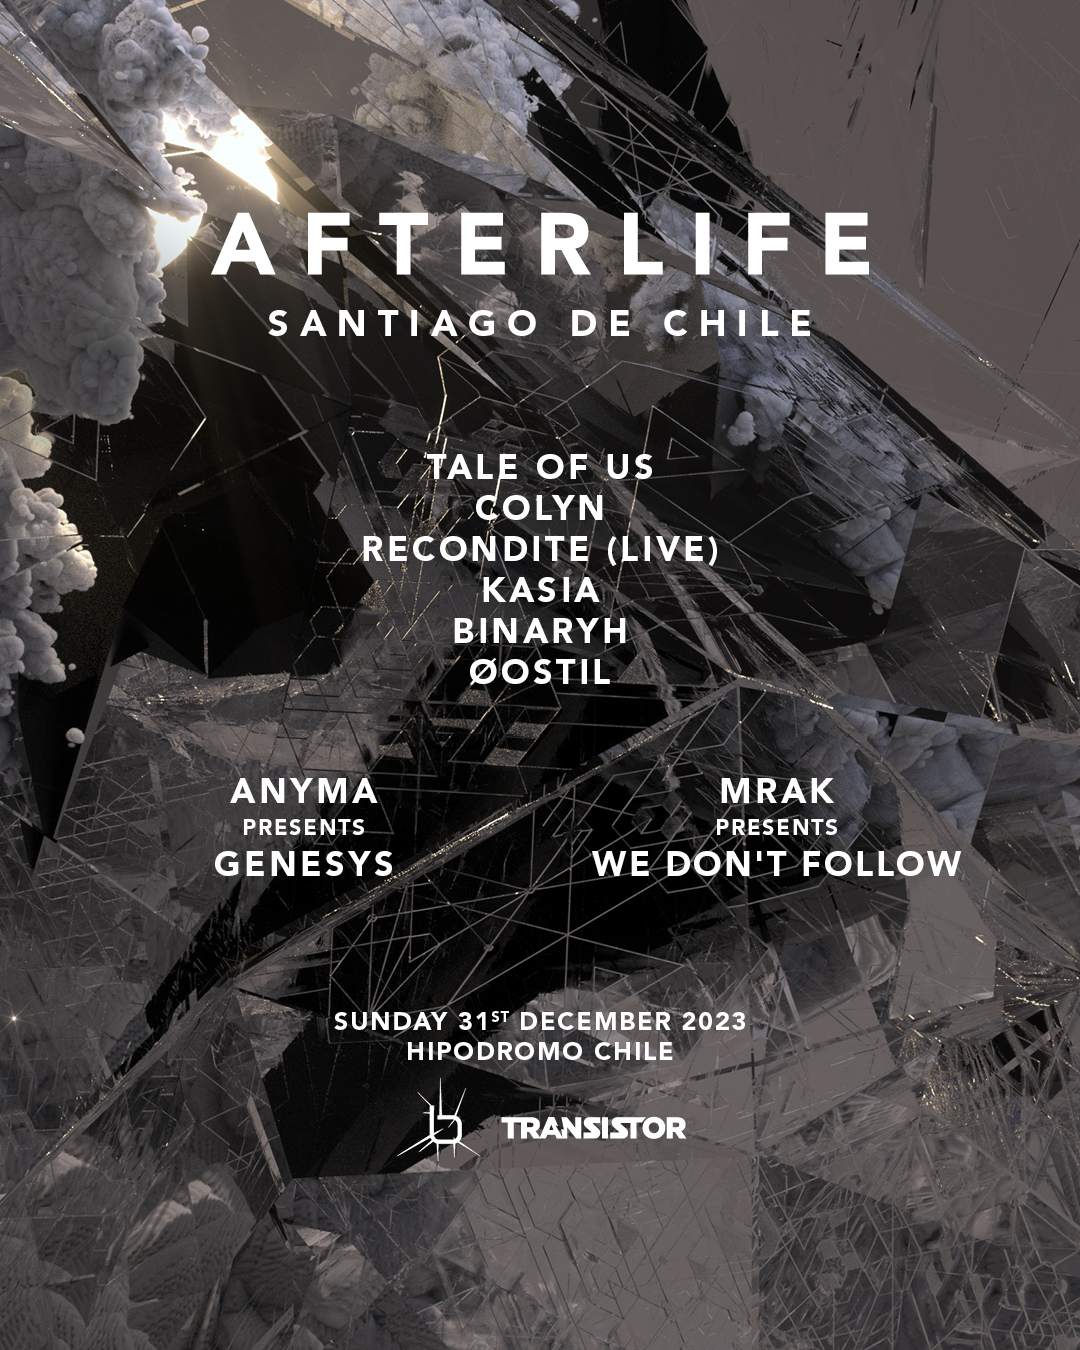 Afterlife Chile 2023 - フライヤー裏